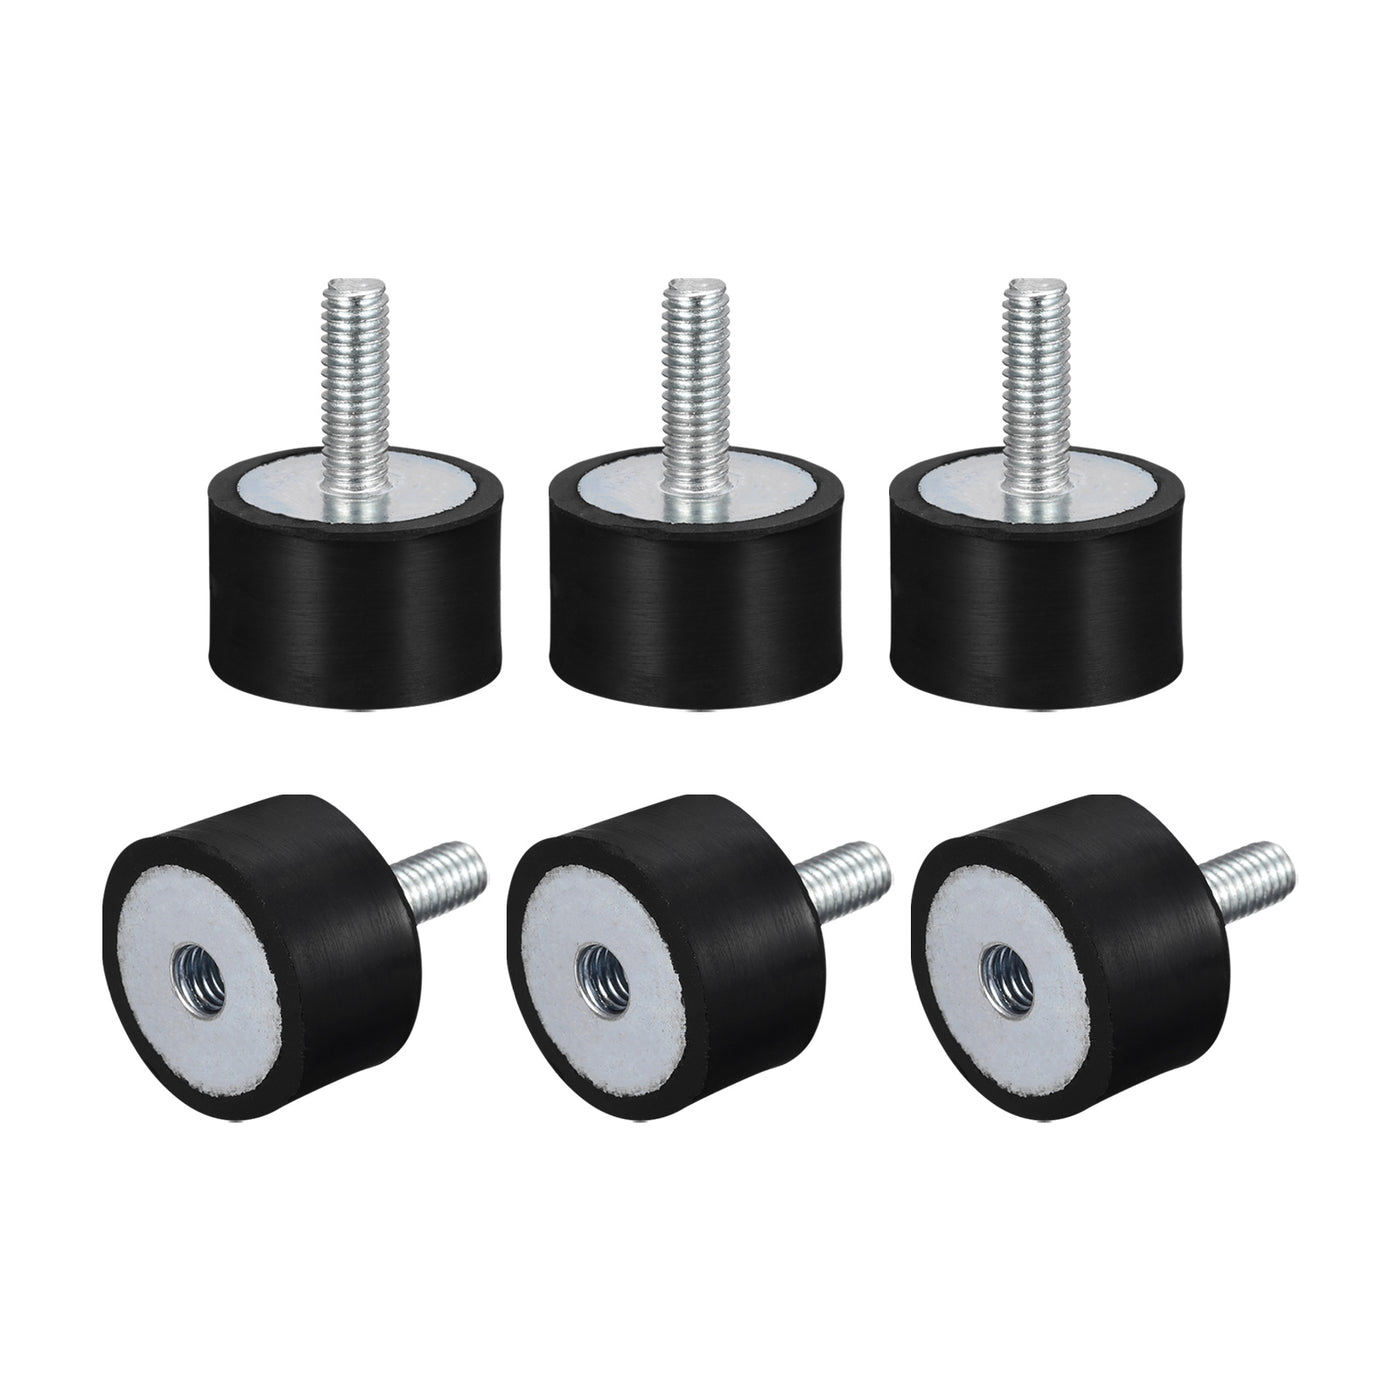 uxcell Uxcell Rubber Mount 6pcs M6 Male/Female Vibration Isolator Shock Absorber, D25mmxH15mm